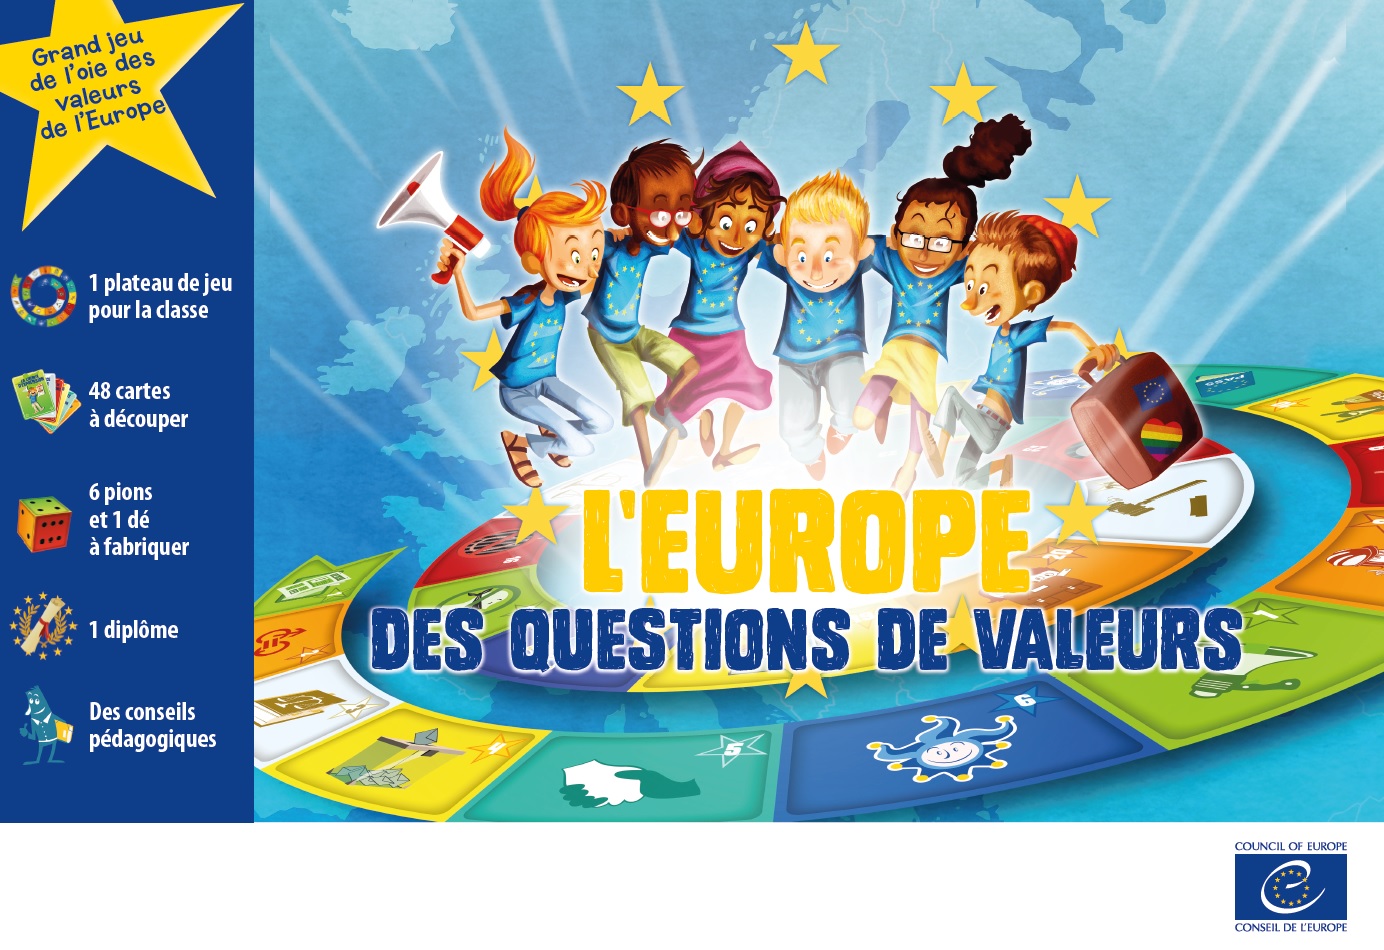 The Council of Europe has released an educational game